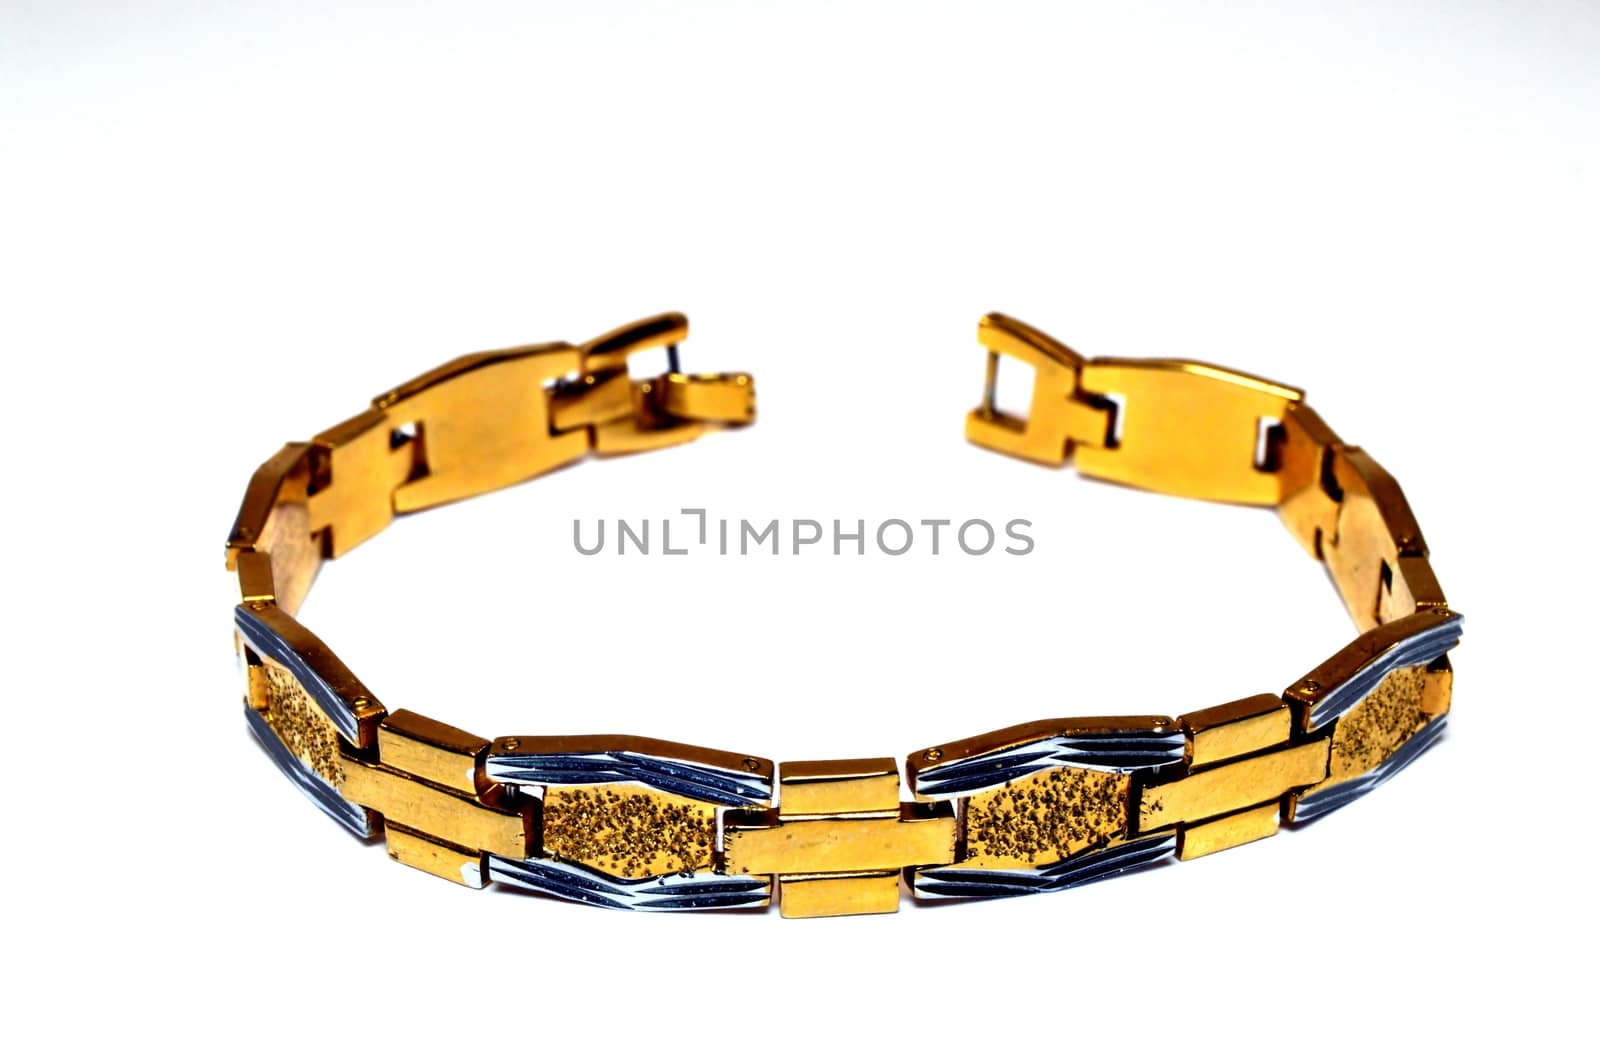 Bracelet gilded with small diamonds by Philou1000